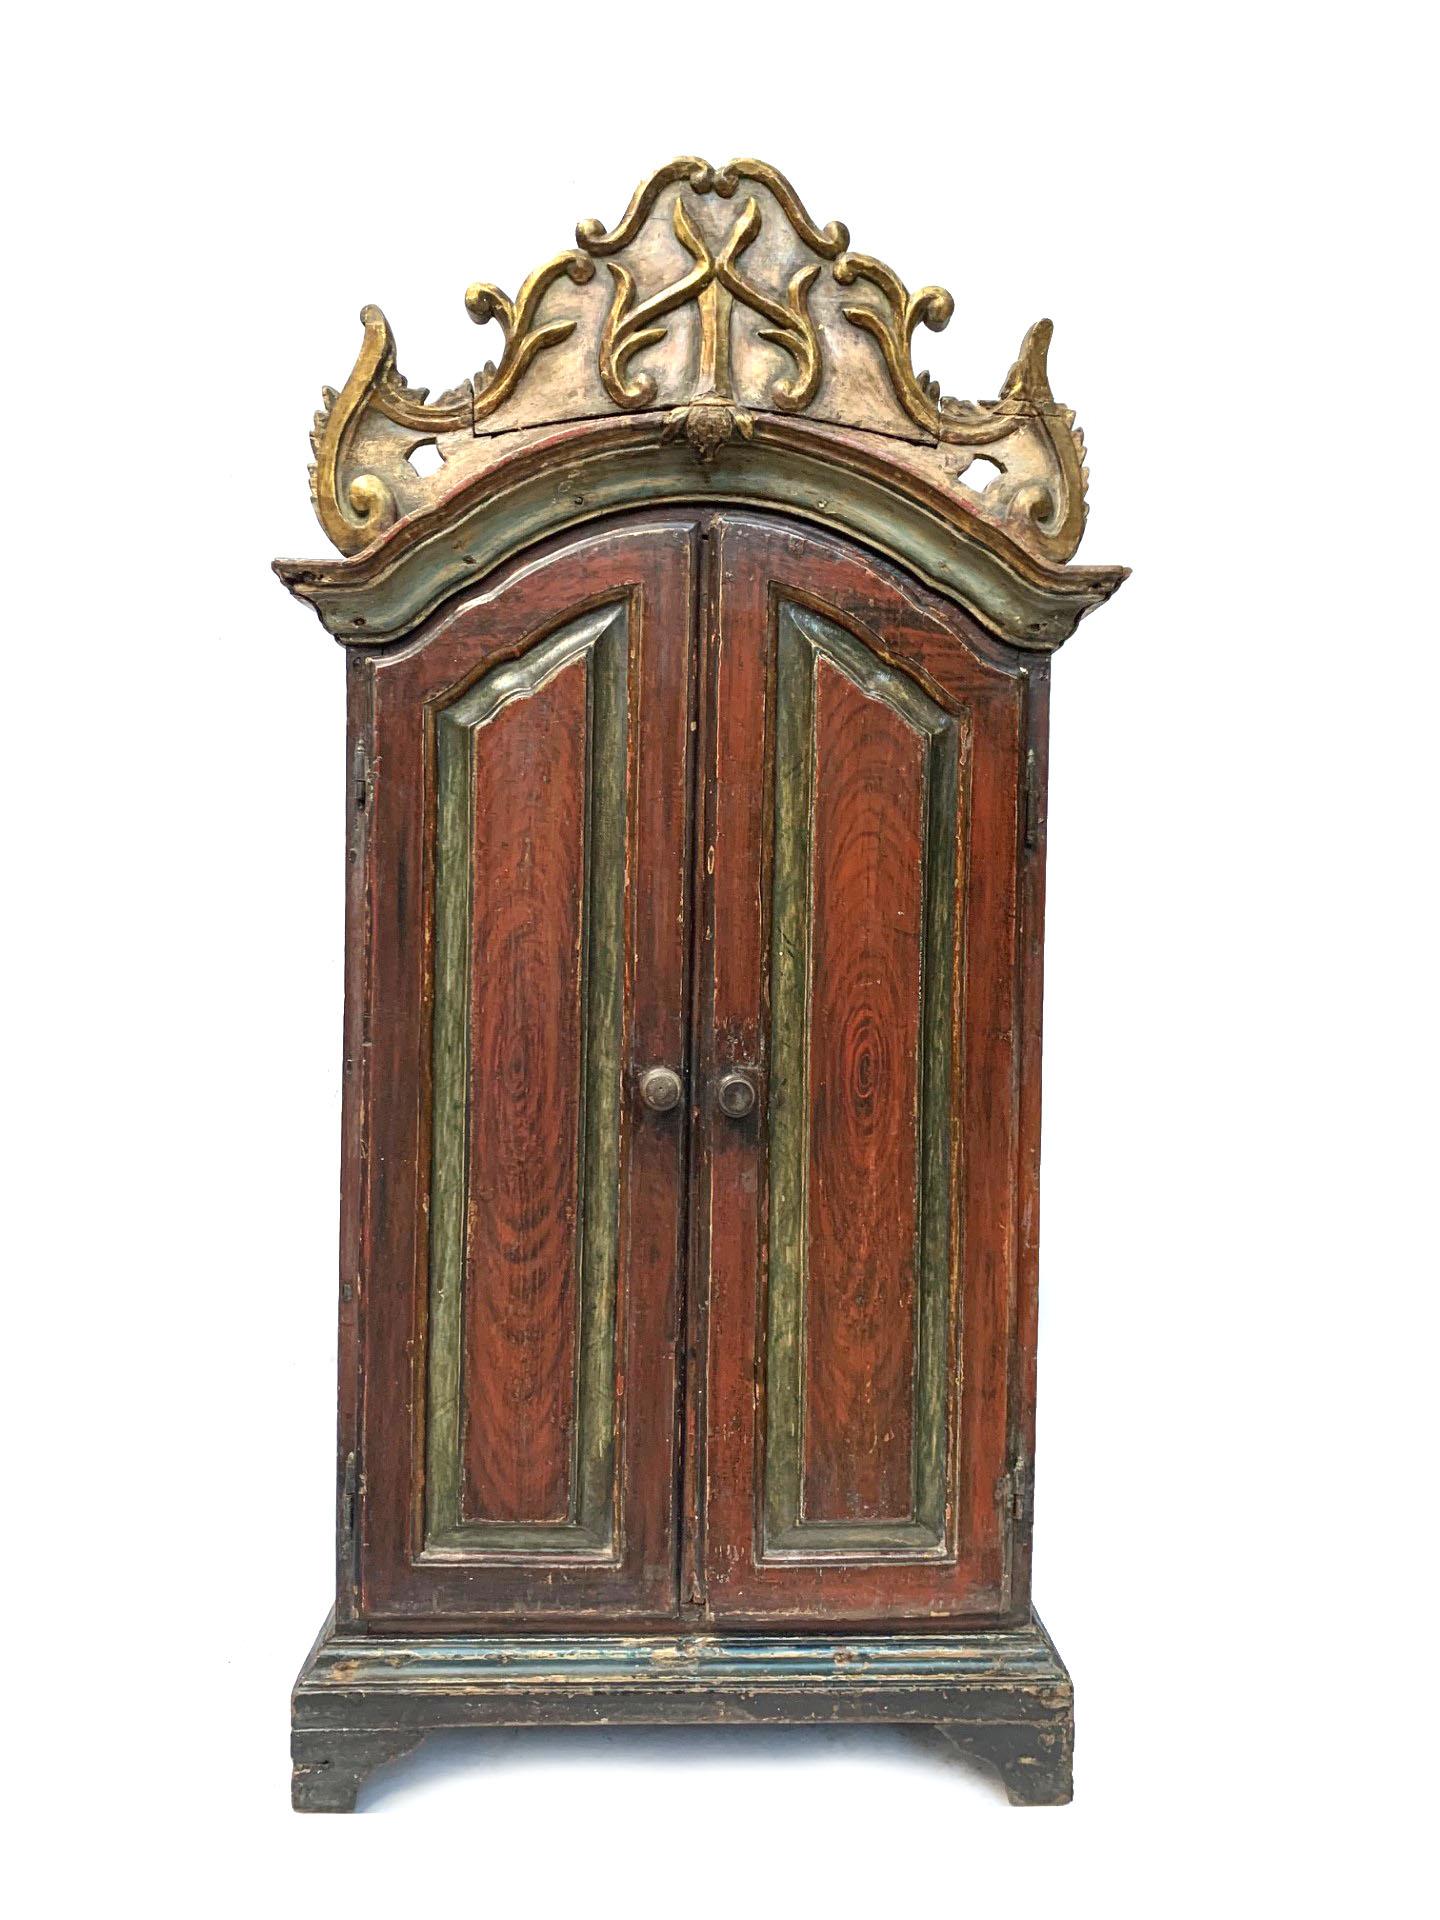 Antique Mid 18th Century Brazilian Baroque Shrine 
Solid carved and painted brazilian cedar wood.
Richly carved and painted . All original patina from the centurys. 
The domestic shrines have been present in the brazilian homes since the XVIIth